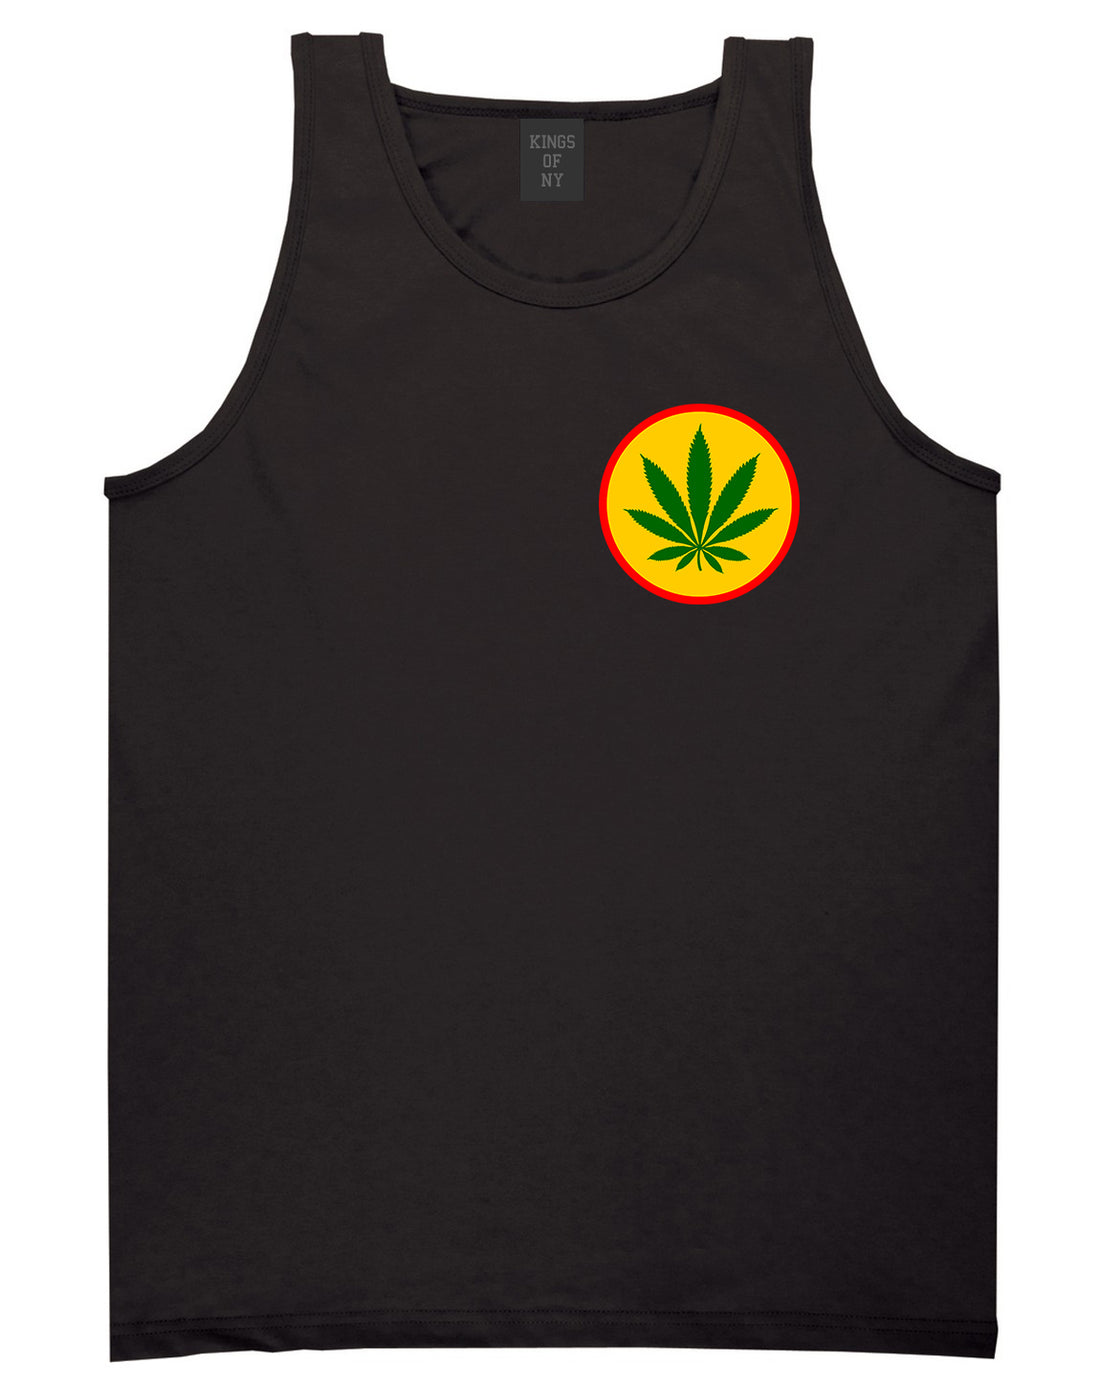 Ganja Green Weed Leaf Chest Mens Black Tank Top Shirt by KINGS OF NY